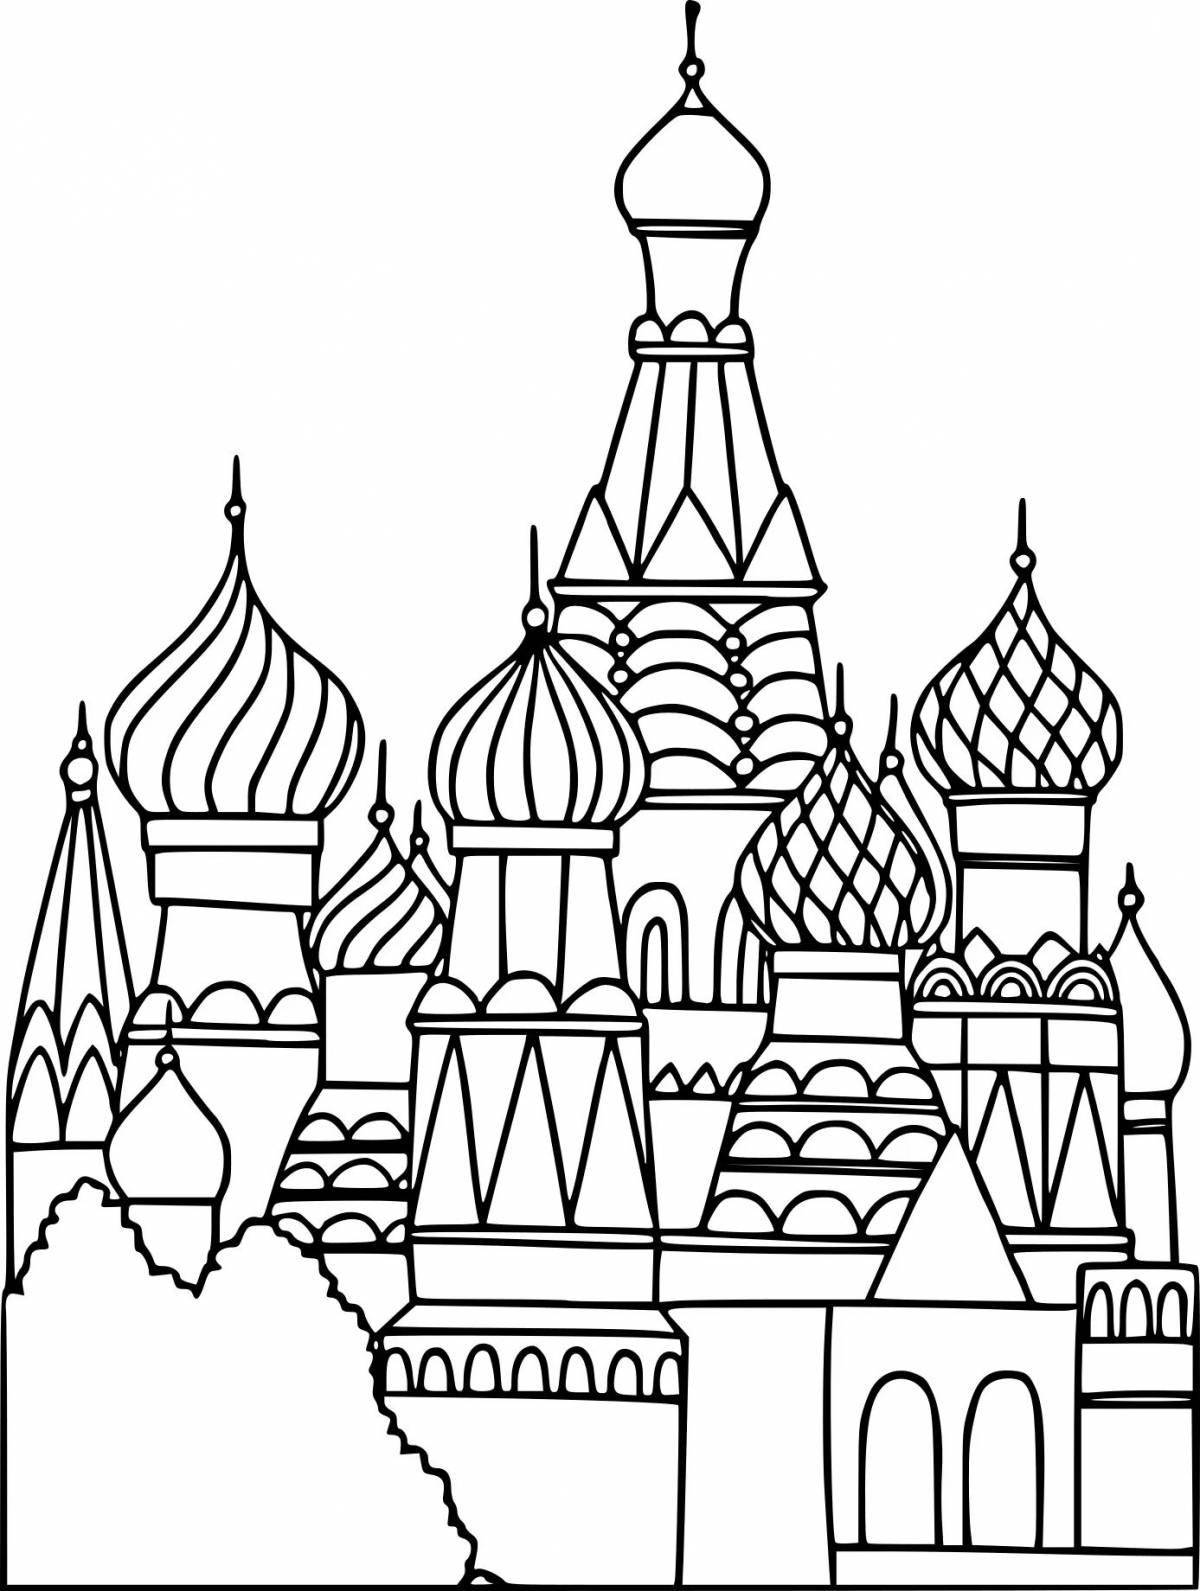 Playful coloring of the Moscow Kremlin for children